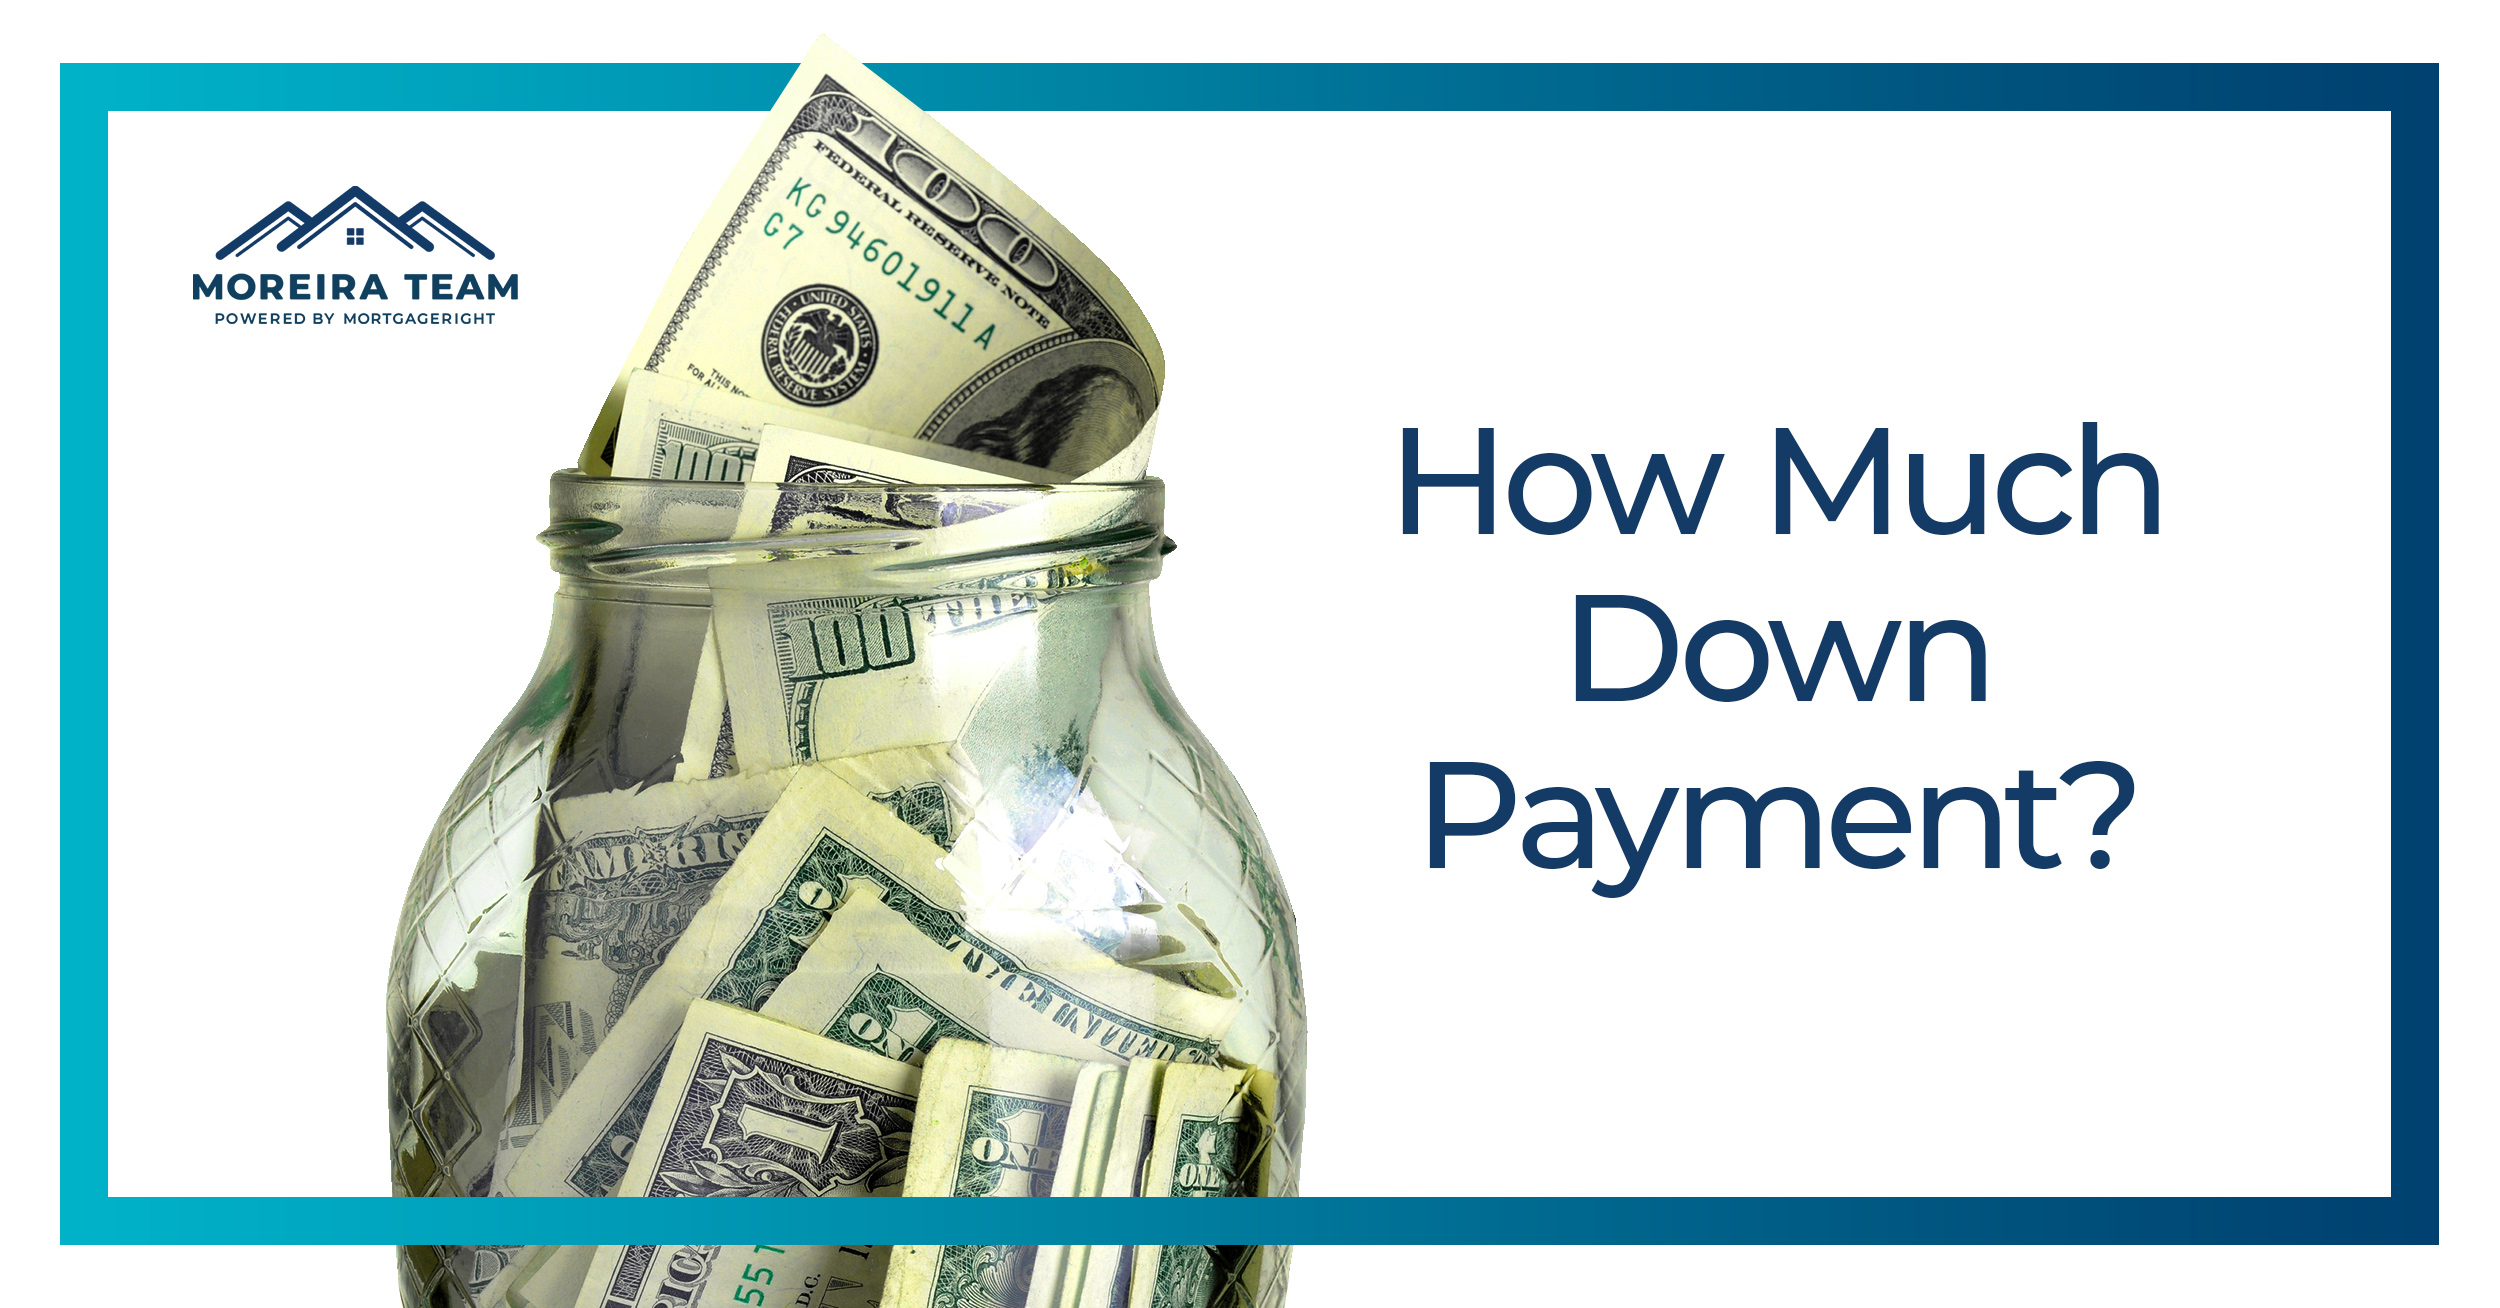 How Much Down Payment for a House?